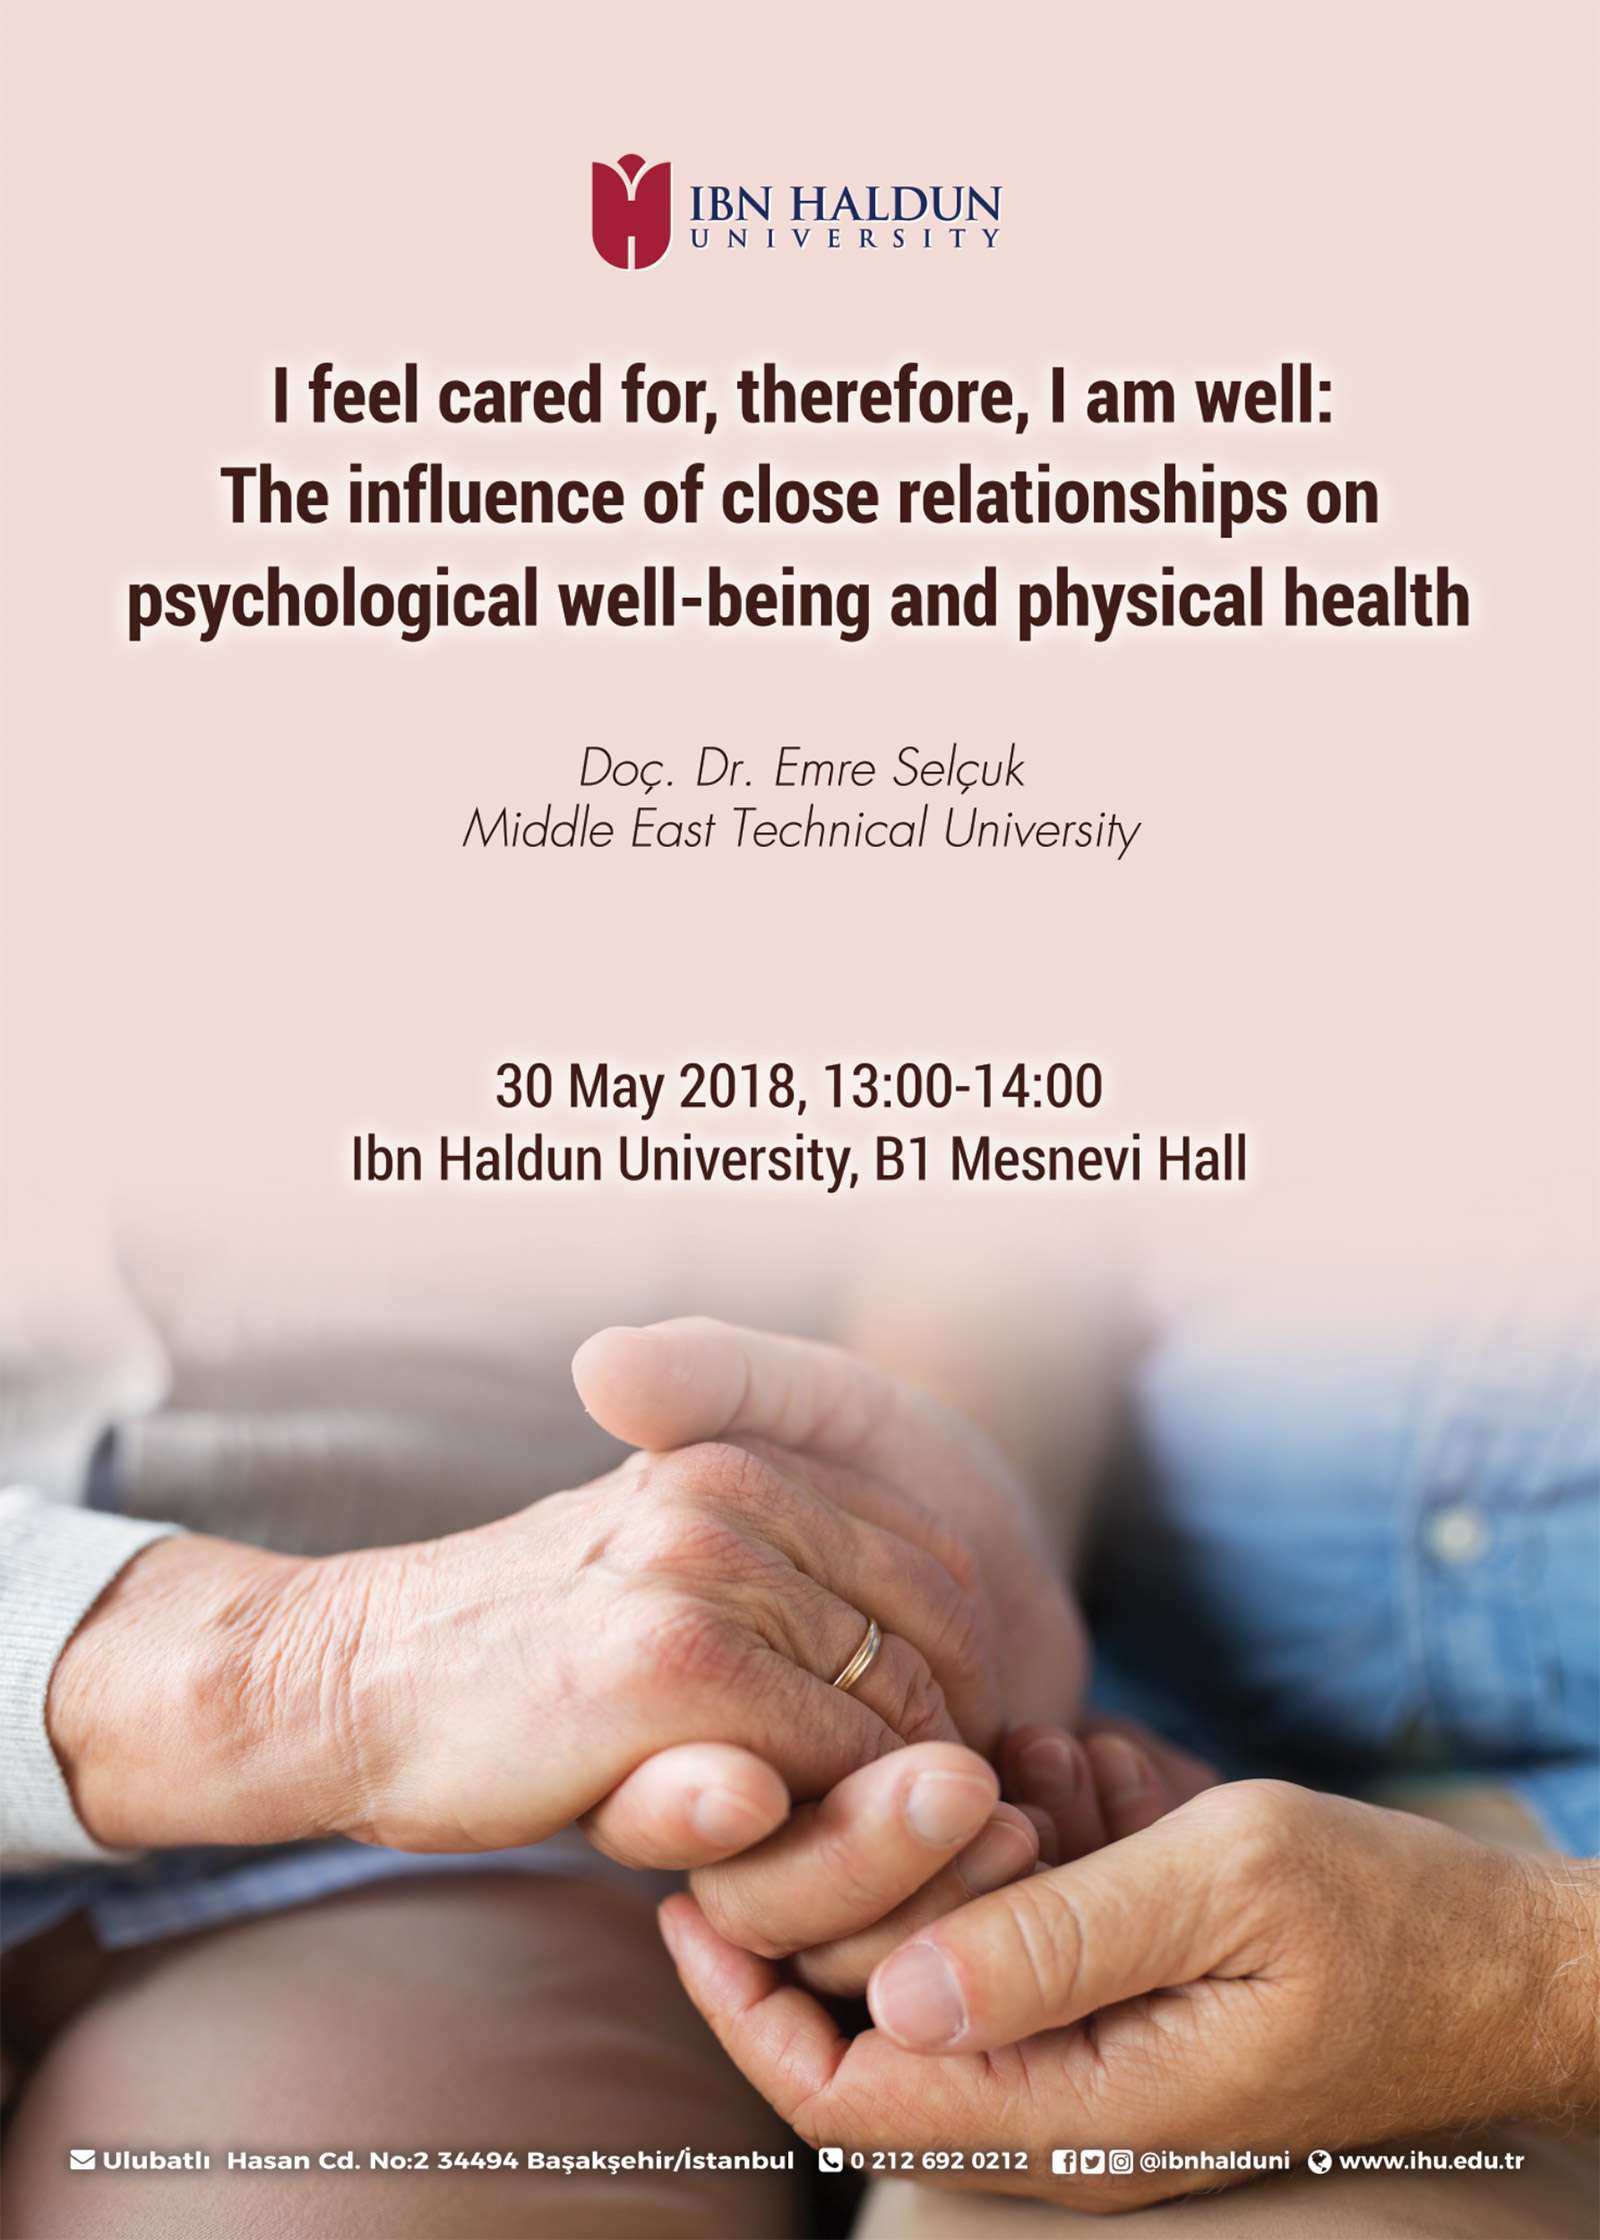 I feel cared for, therefore, I am well: The influence of close relationships on psychological well-being and physical health